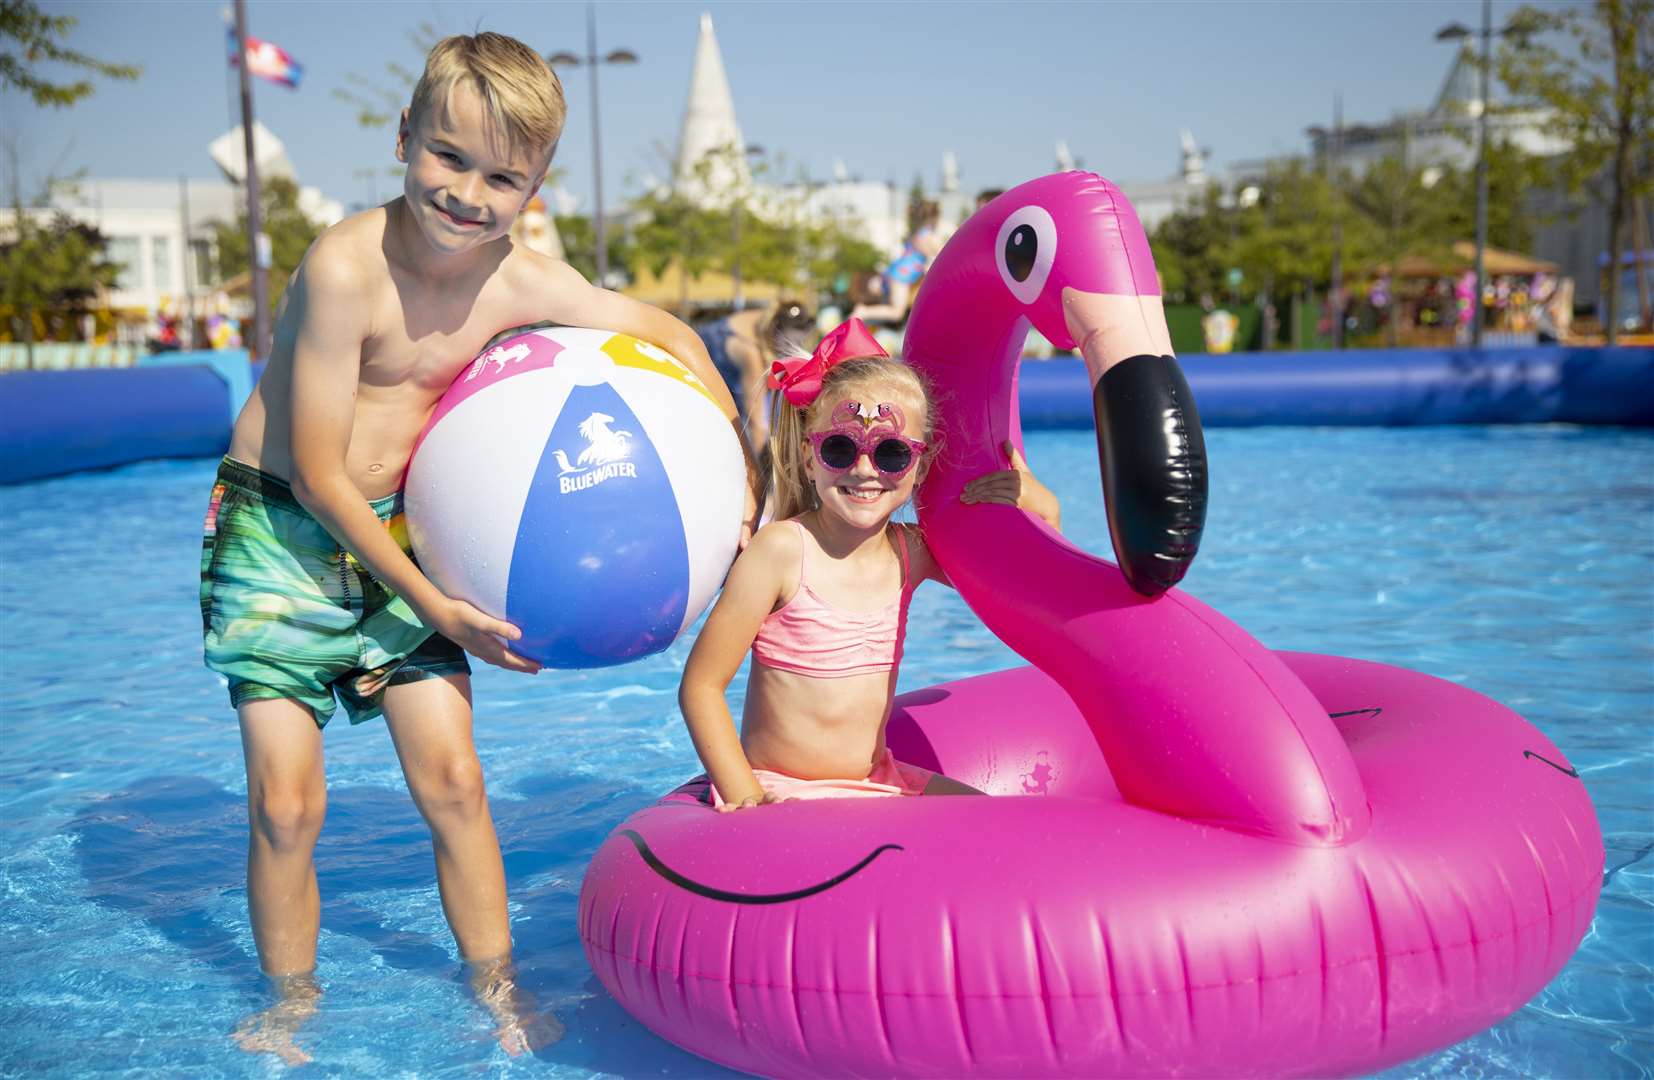 The Beach at Bluewater is back for a third year